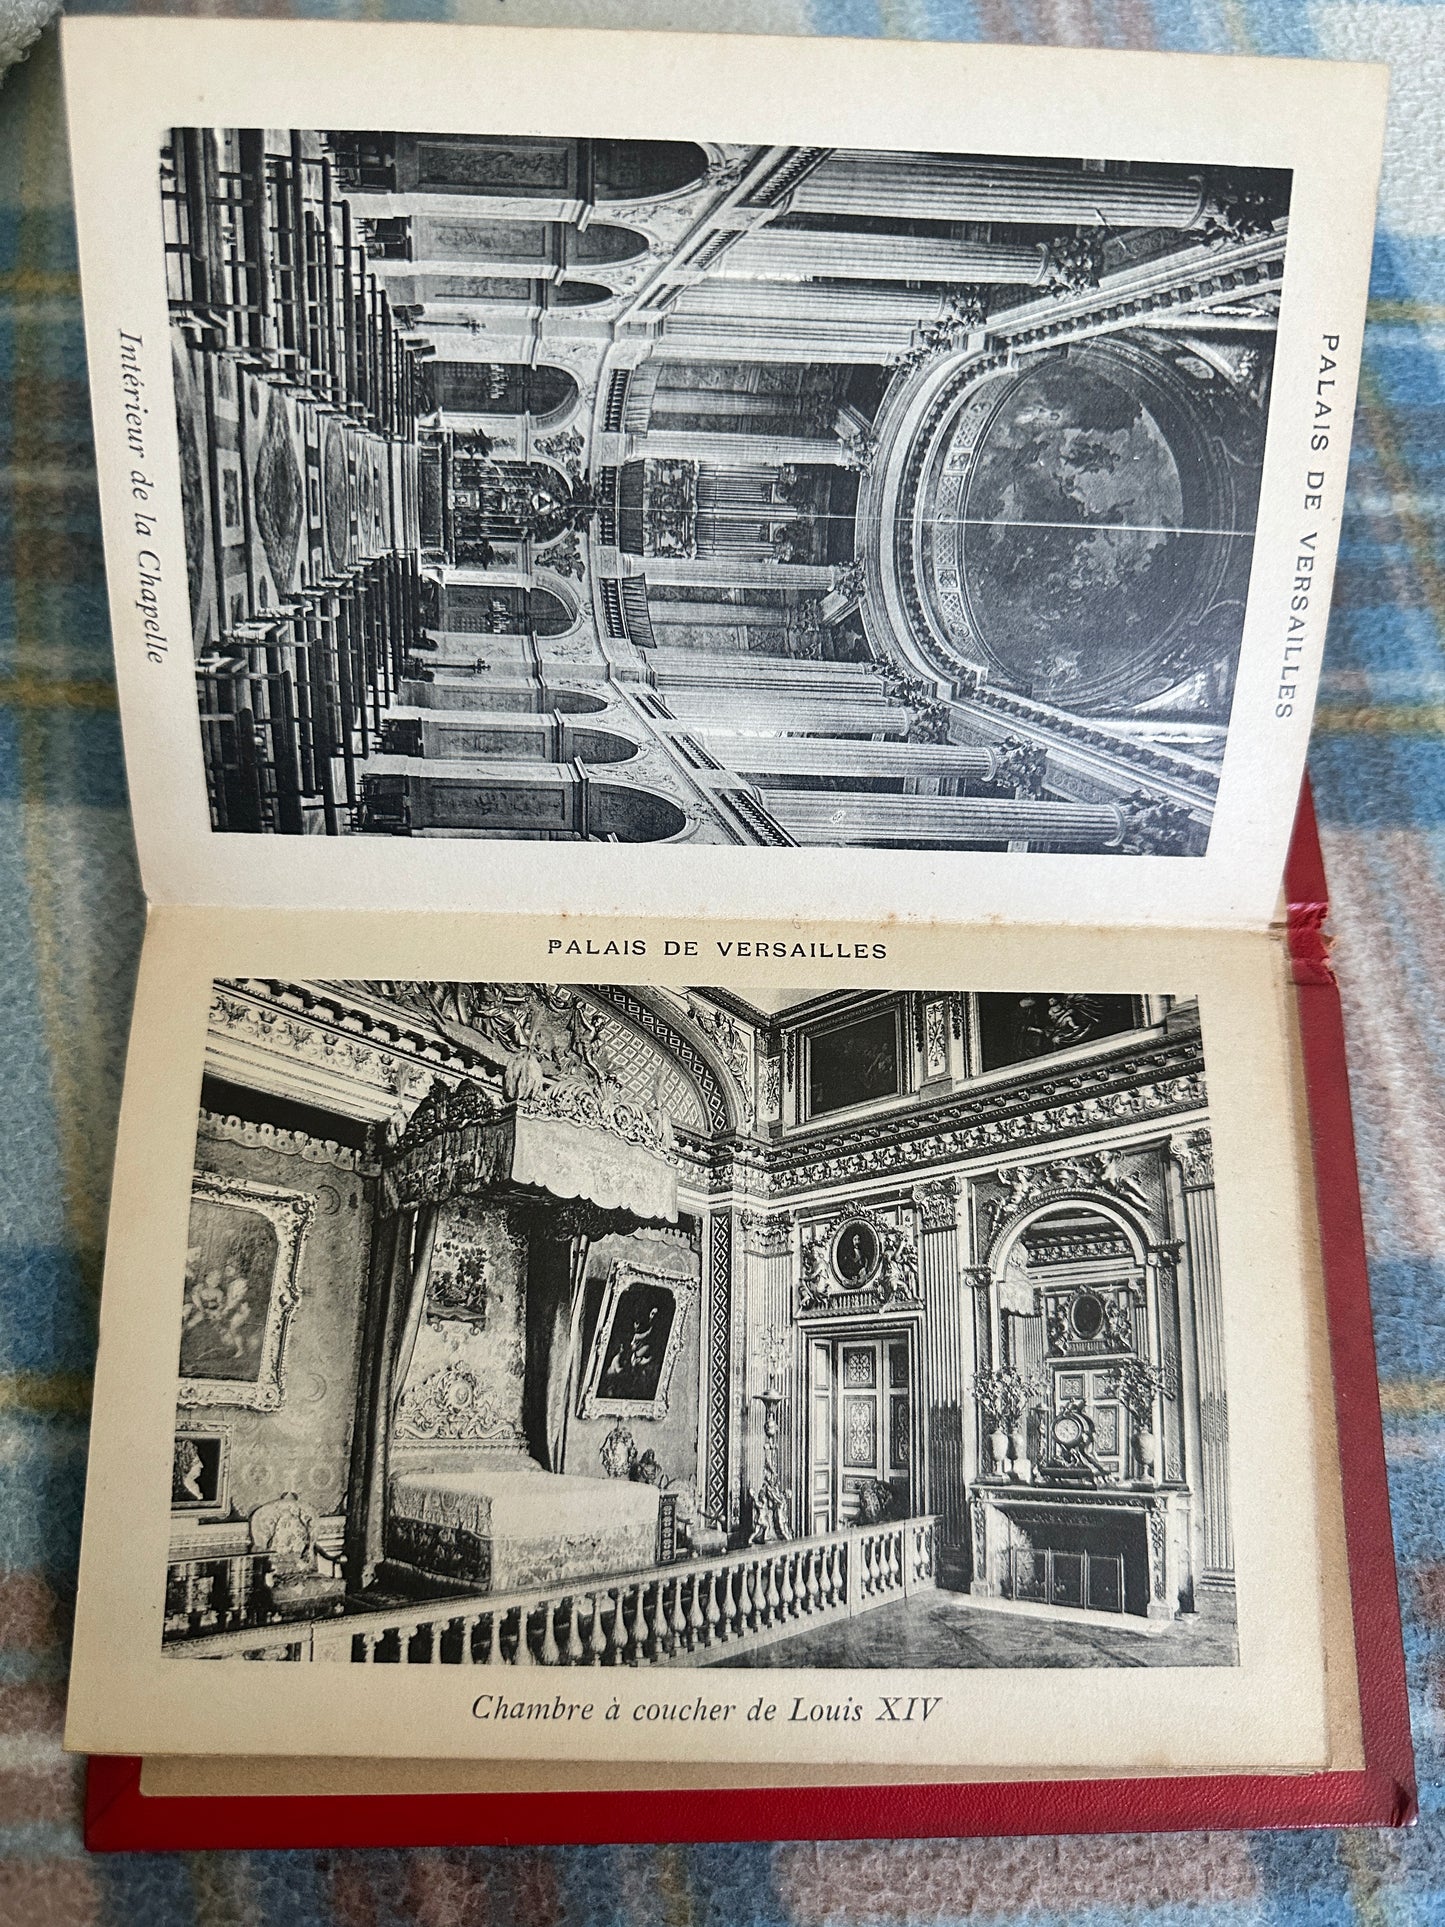 1909 Versailles Et Trianons (Concertina style photo book)